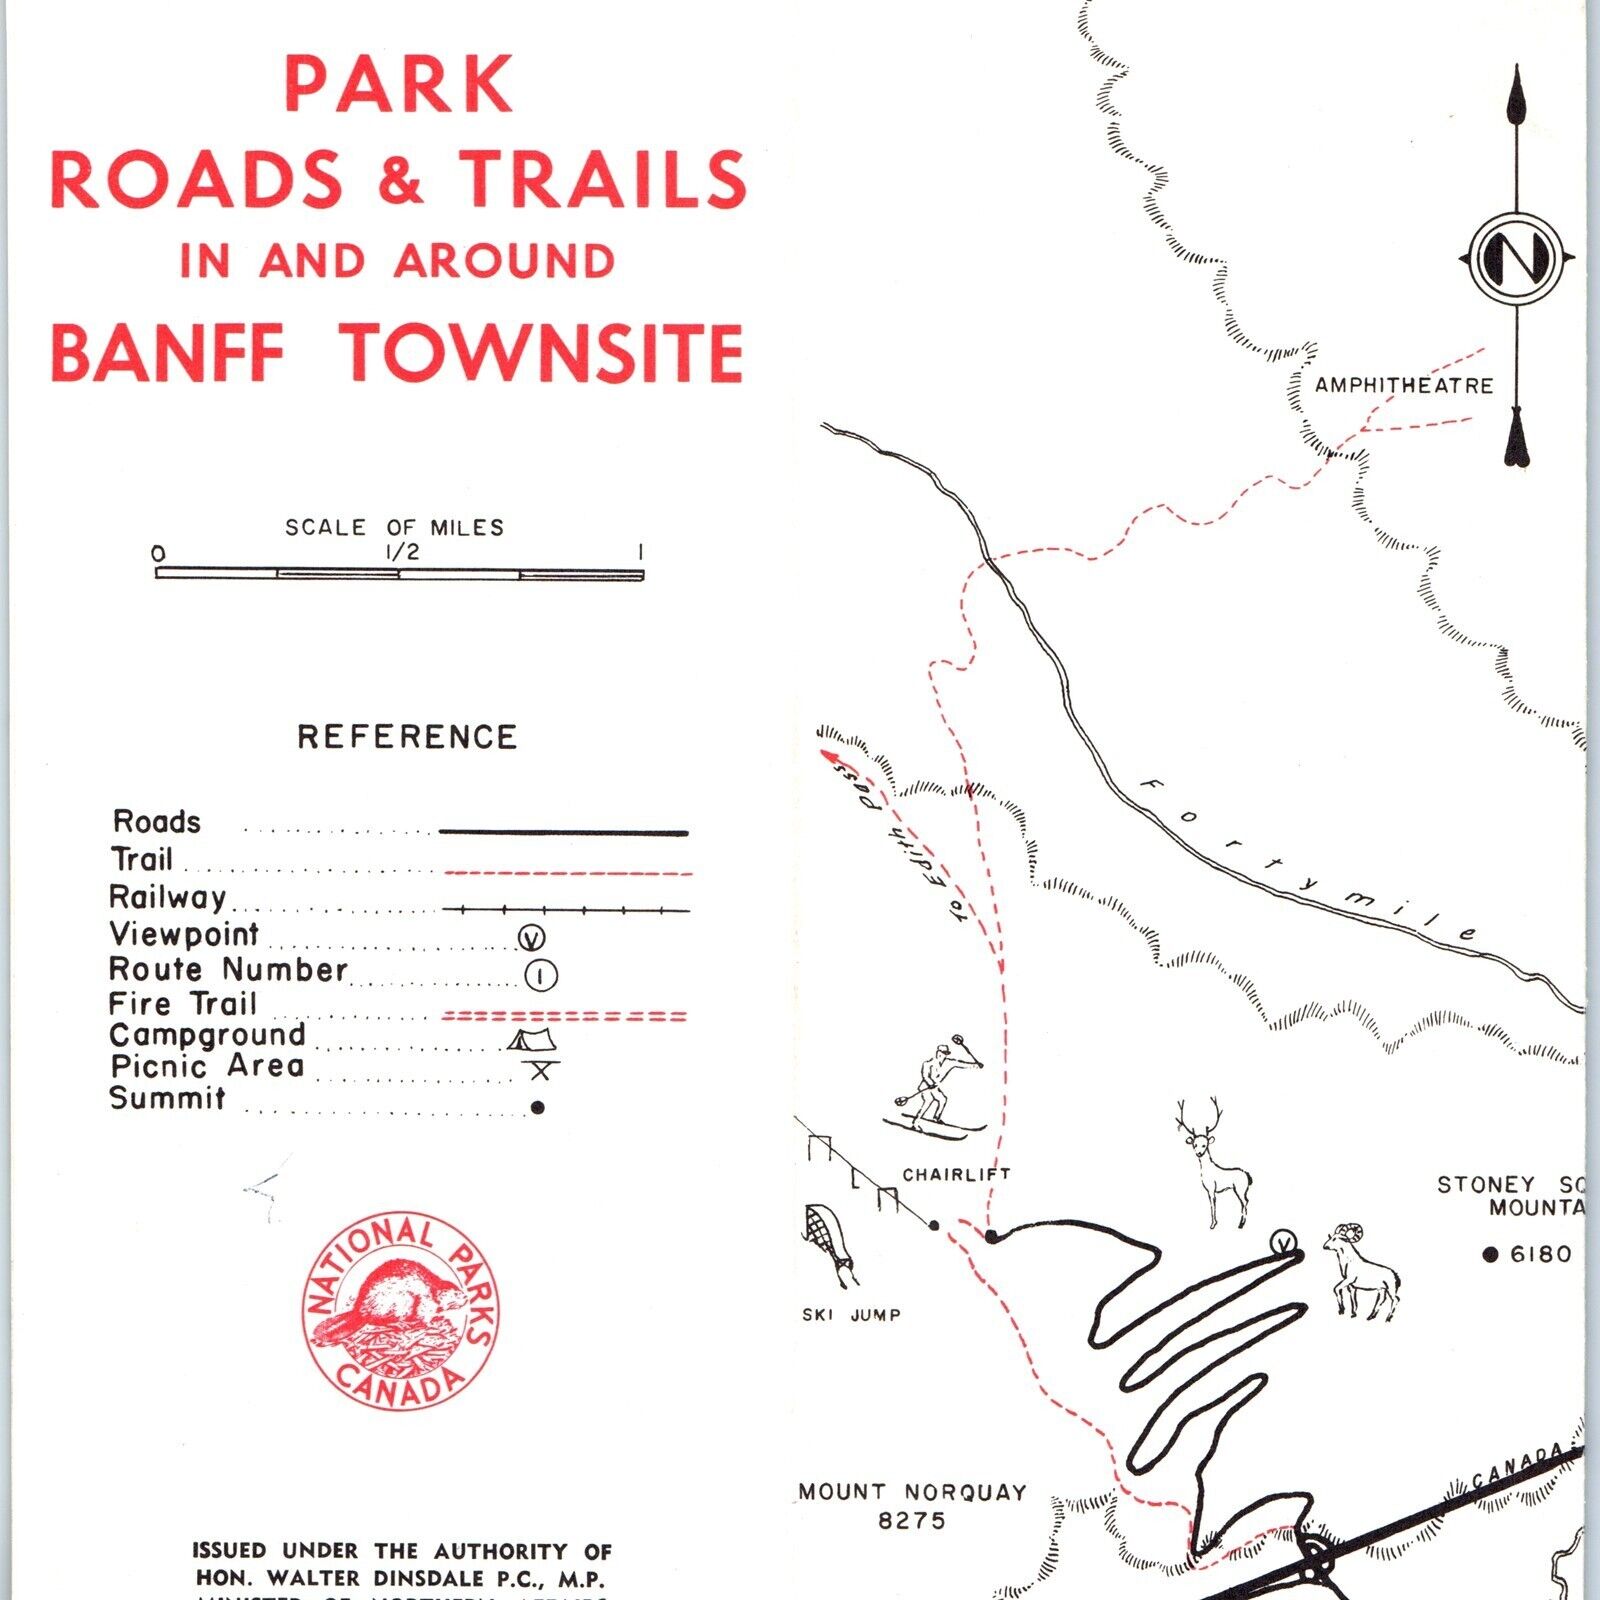 c1960s Banff Townsite, Alberta, CA Map Brochure Issued by Walter Dinsdale CAN 1N